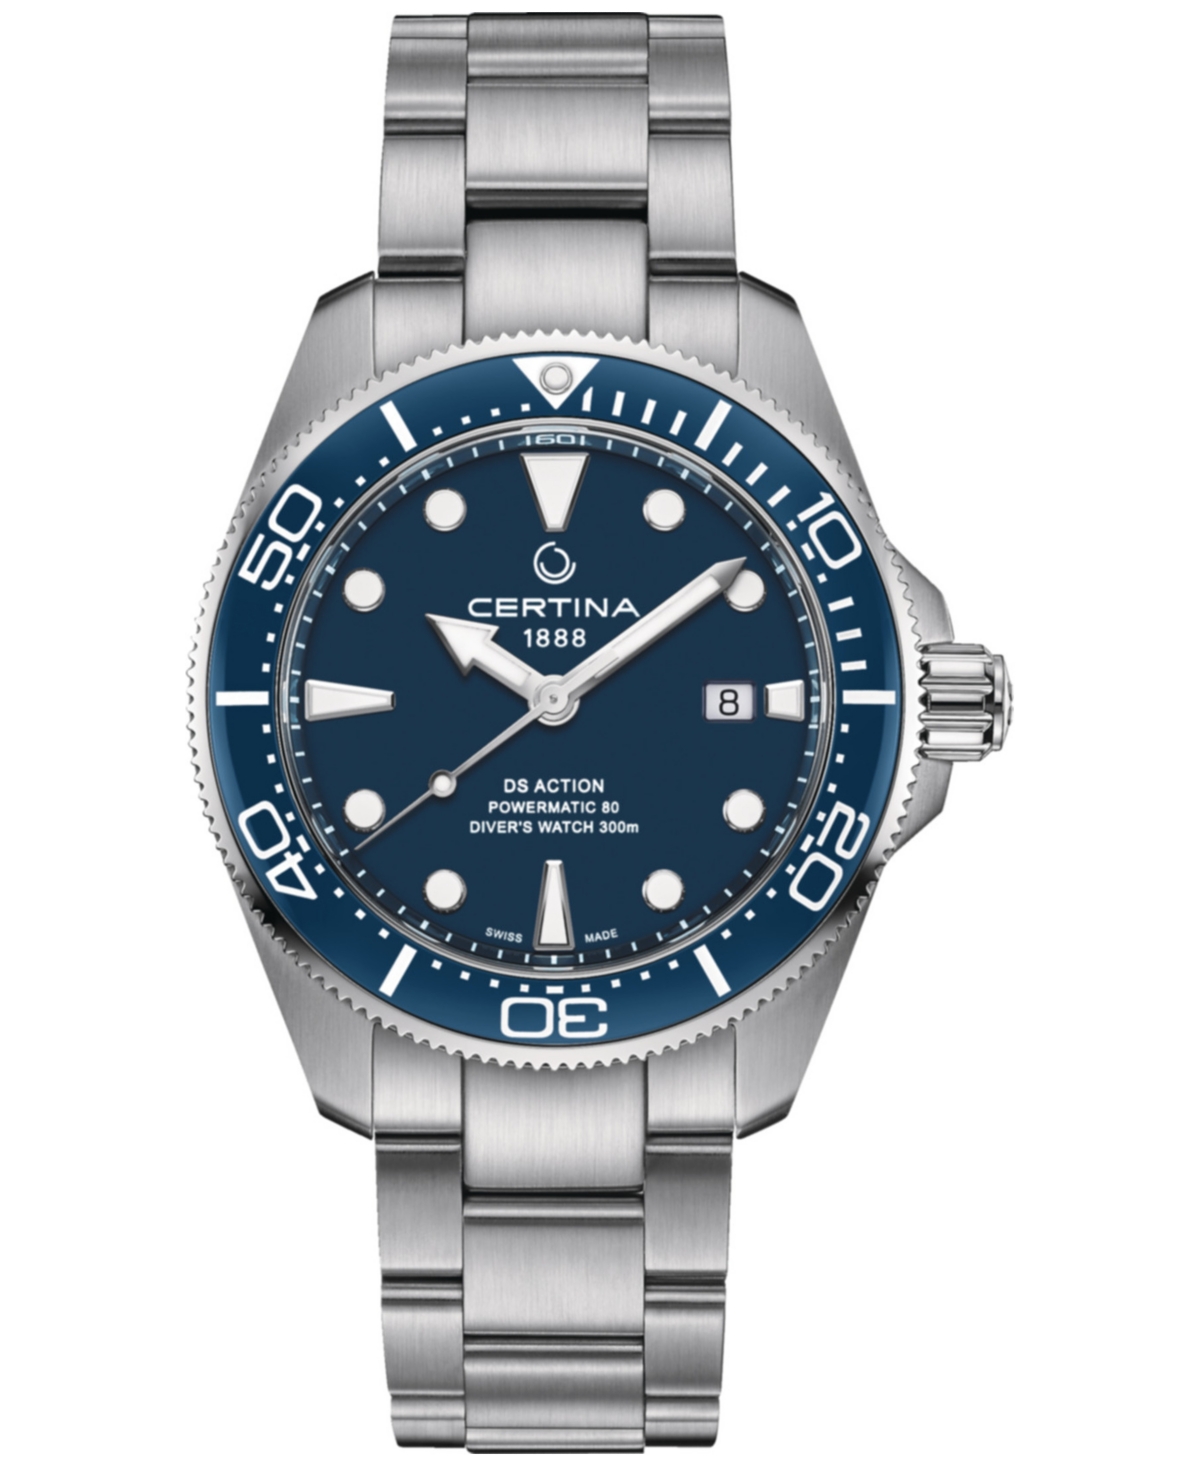 Certina Men's Swiss Automatic Ds Action Diver Stainless Steel Bracelet Watch 43mm In Blue